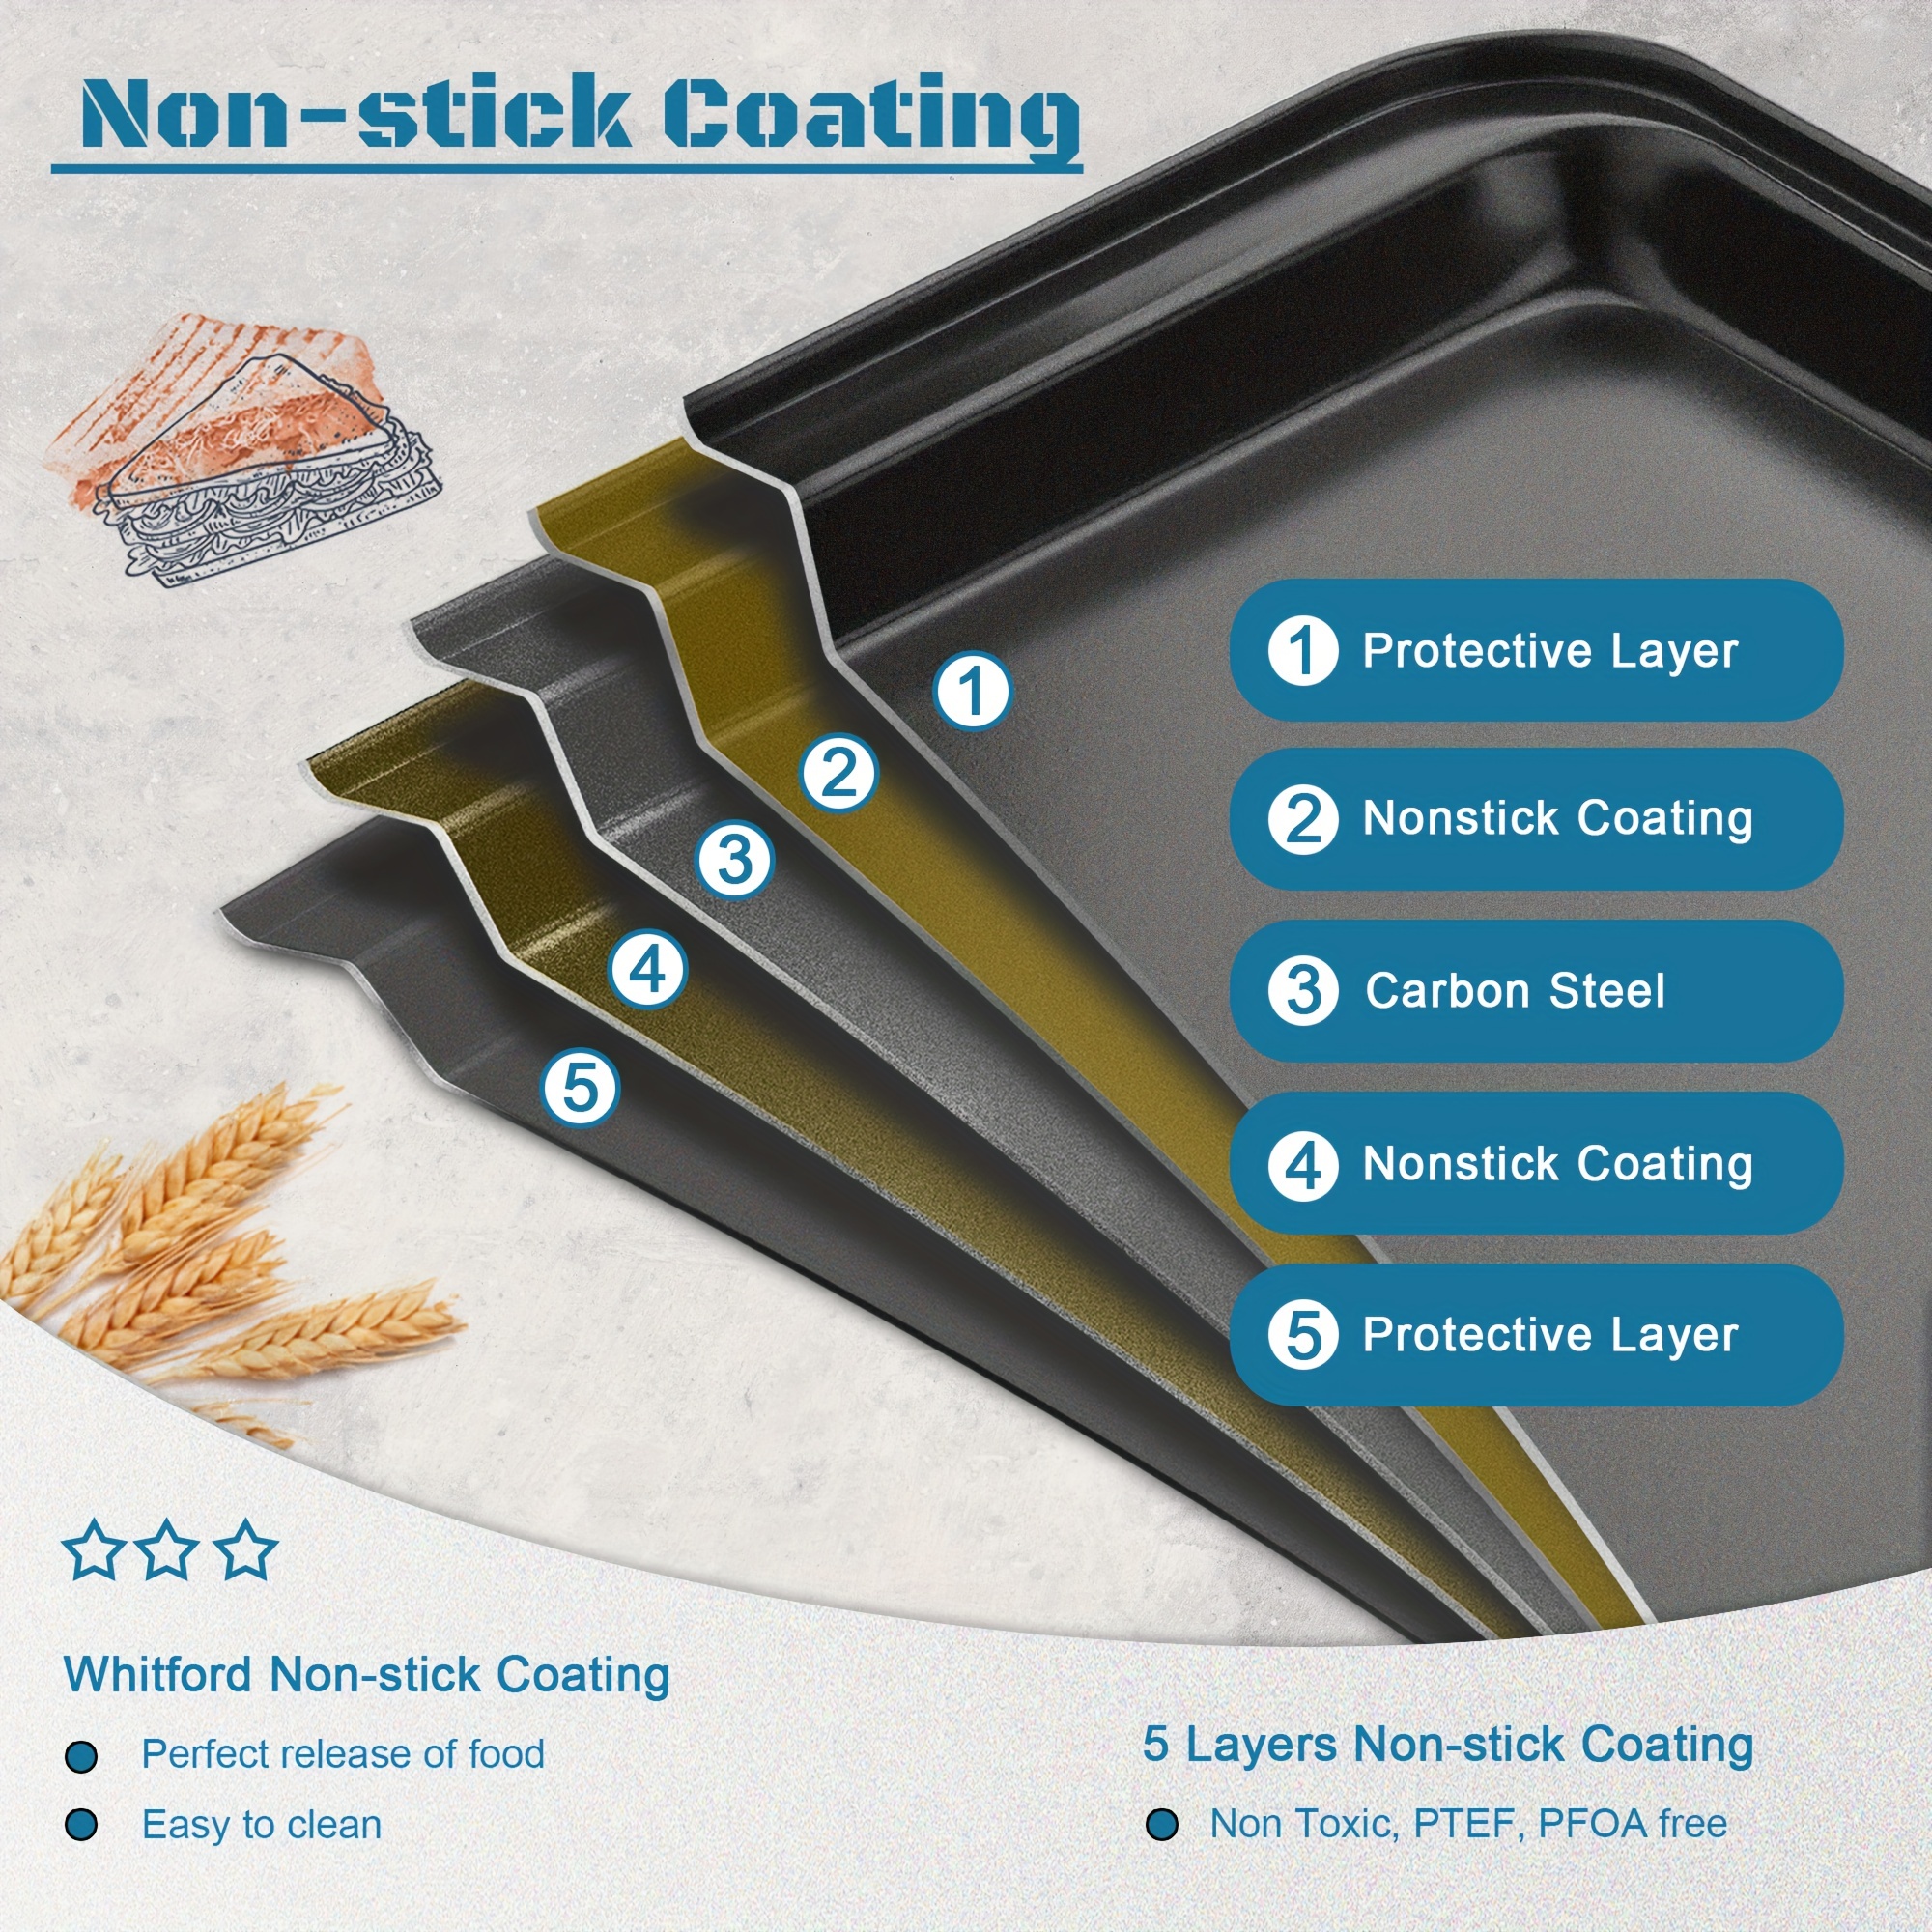 Baking Sheets, Small Cookie Sheets, Baking Tray, Nonstick Carbon